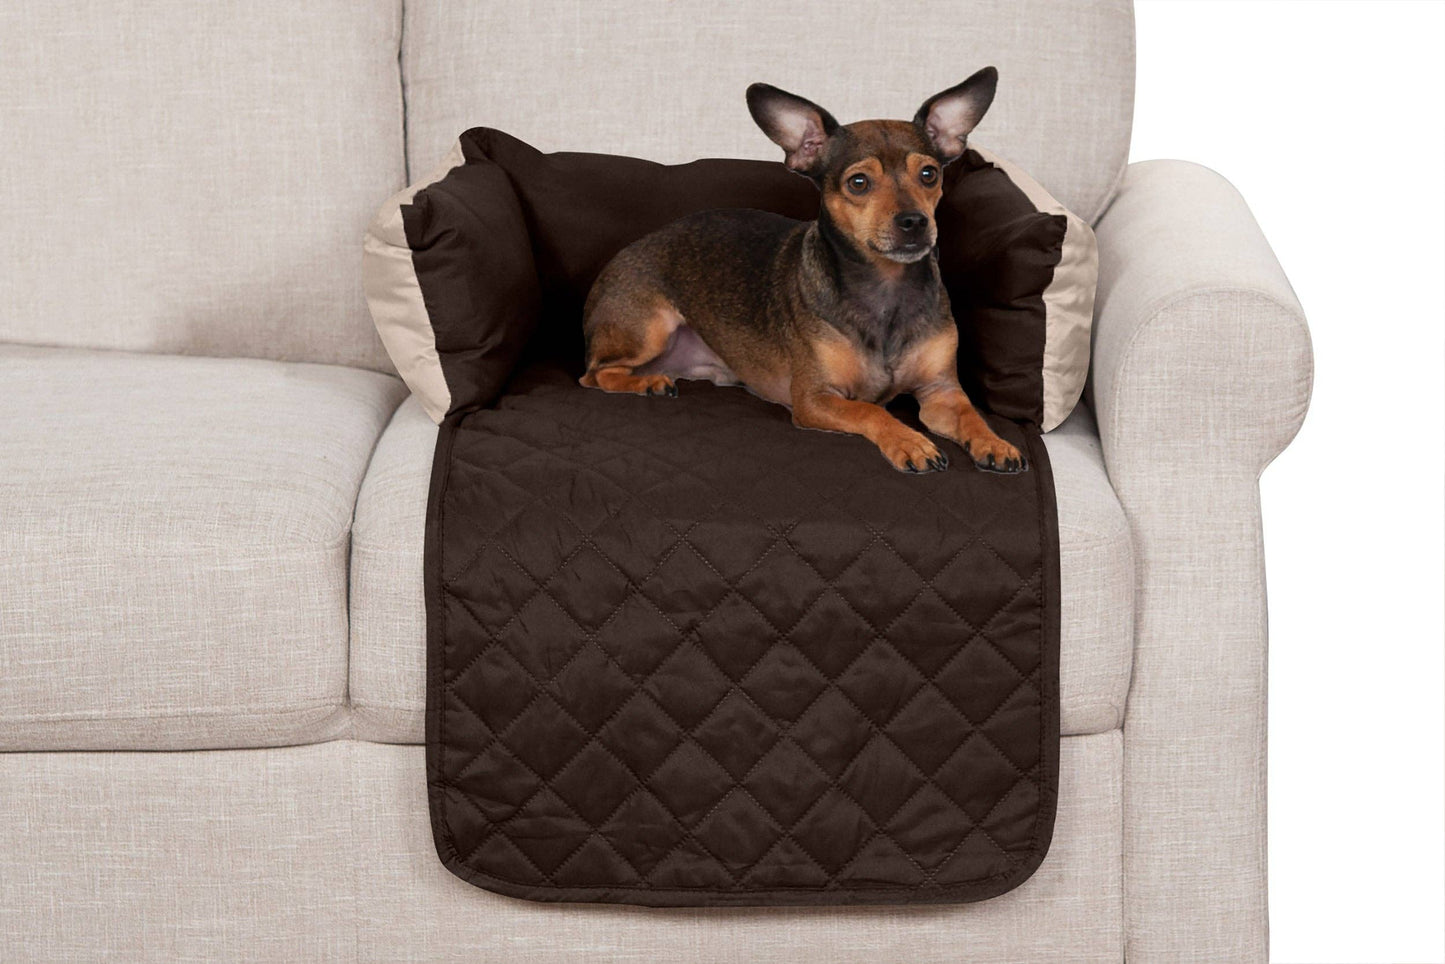 Sofa Buddy Pet Bed Furniture Cover: Large / Gray/Mist